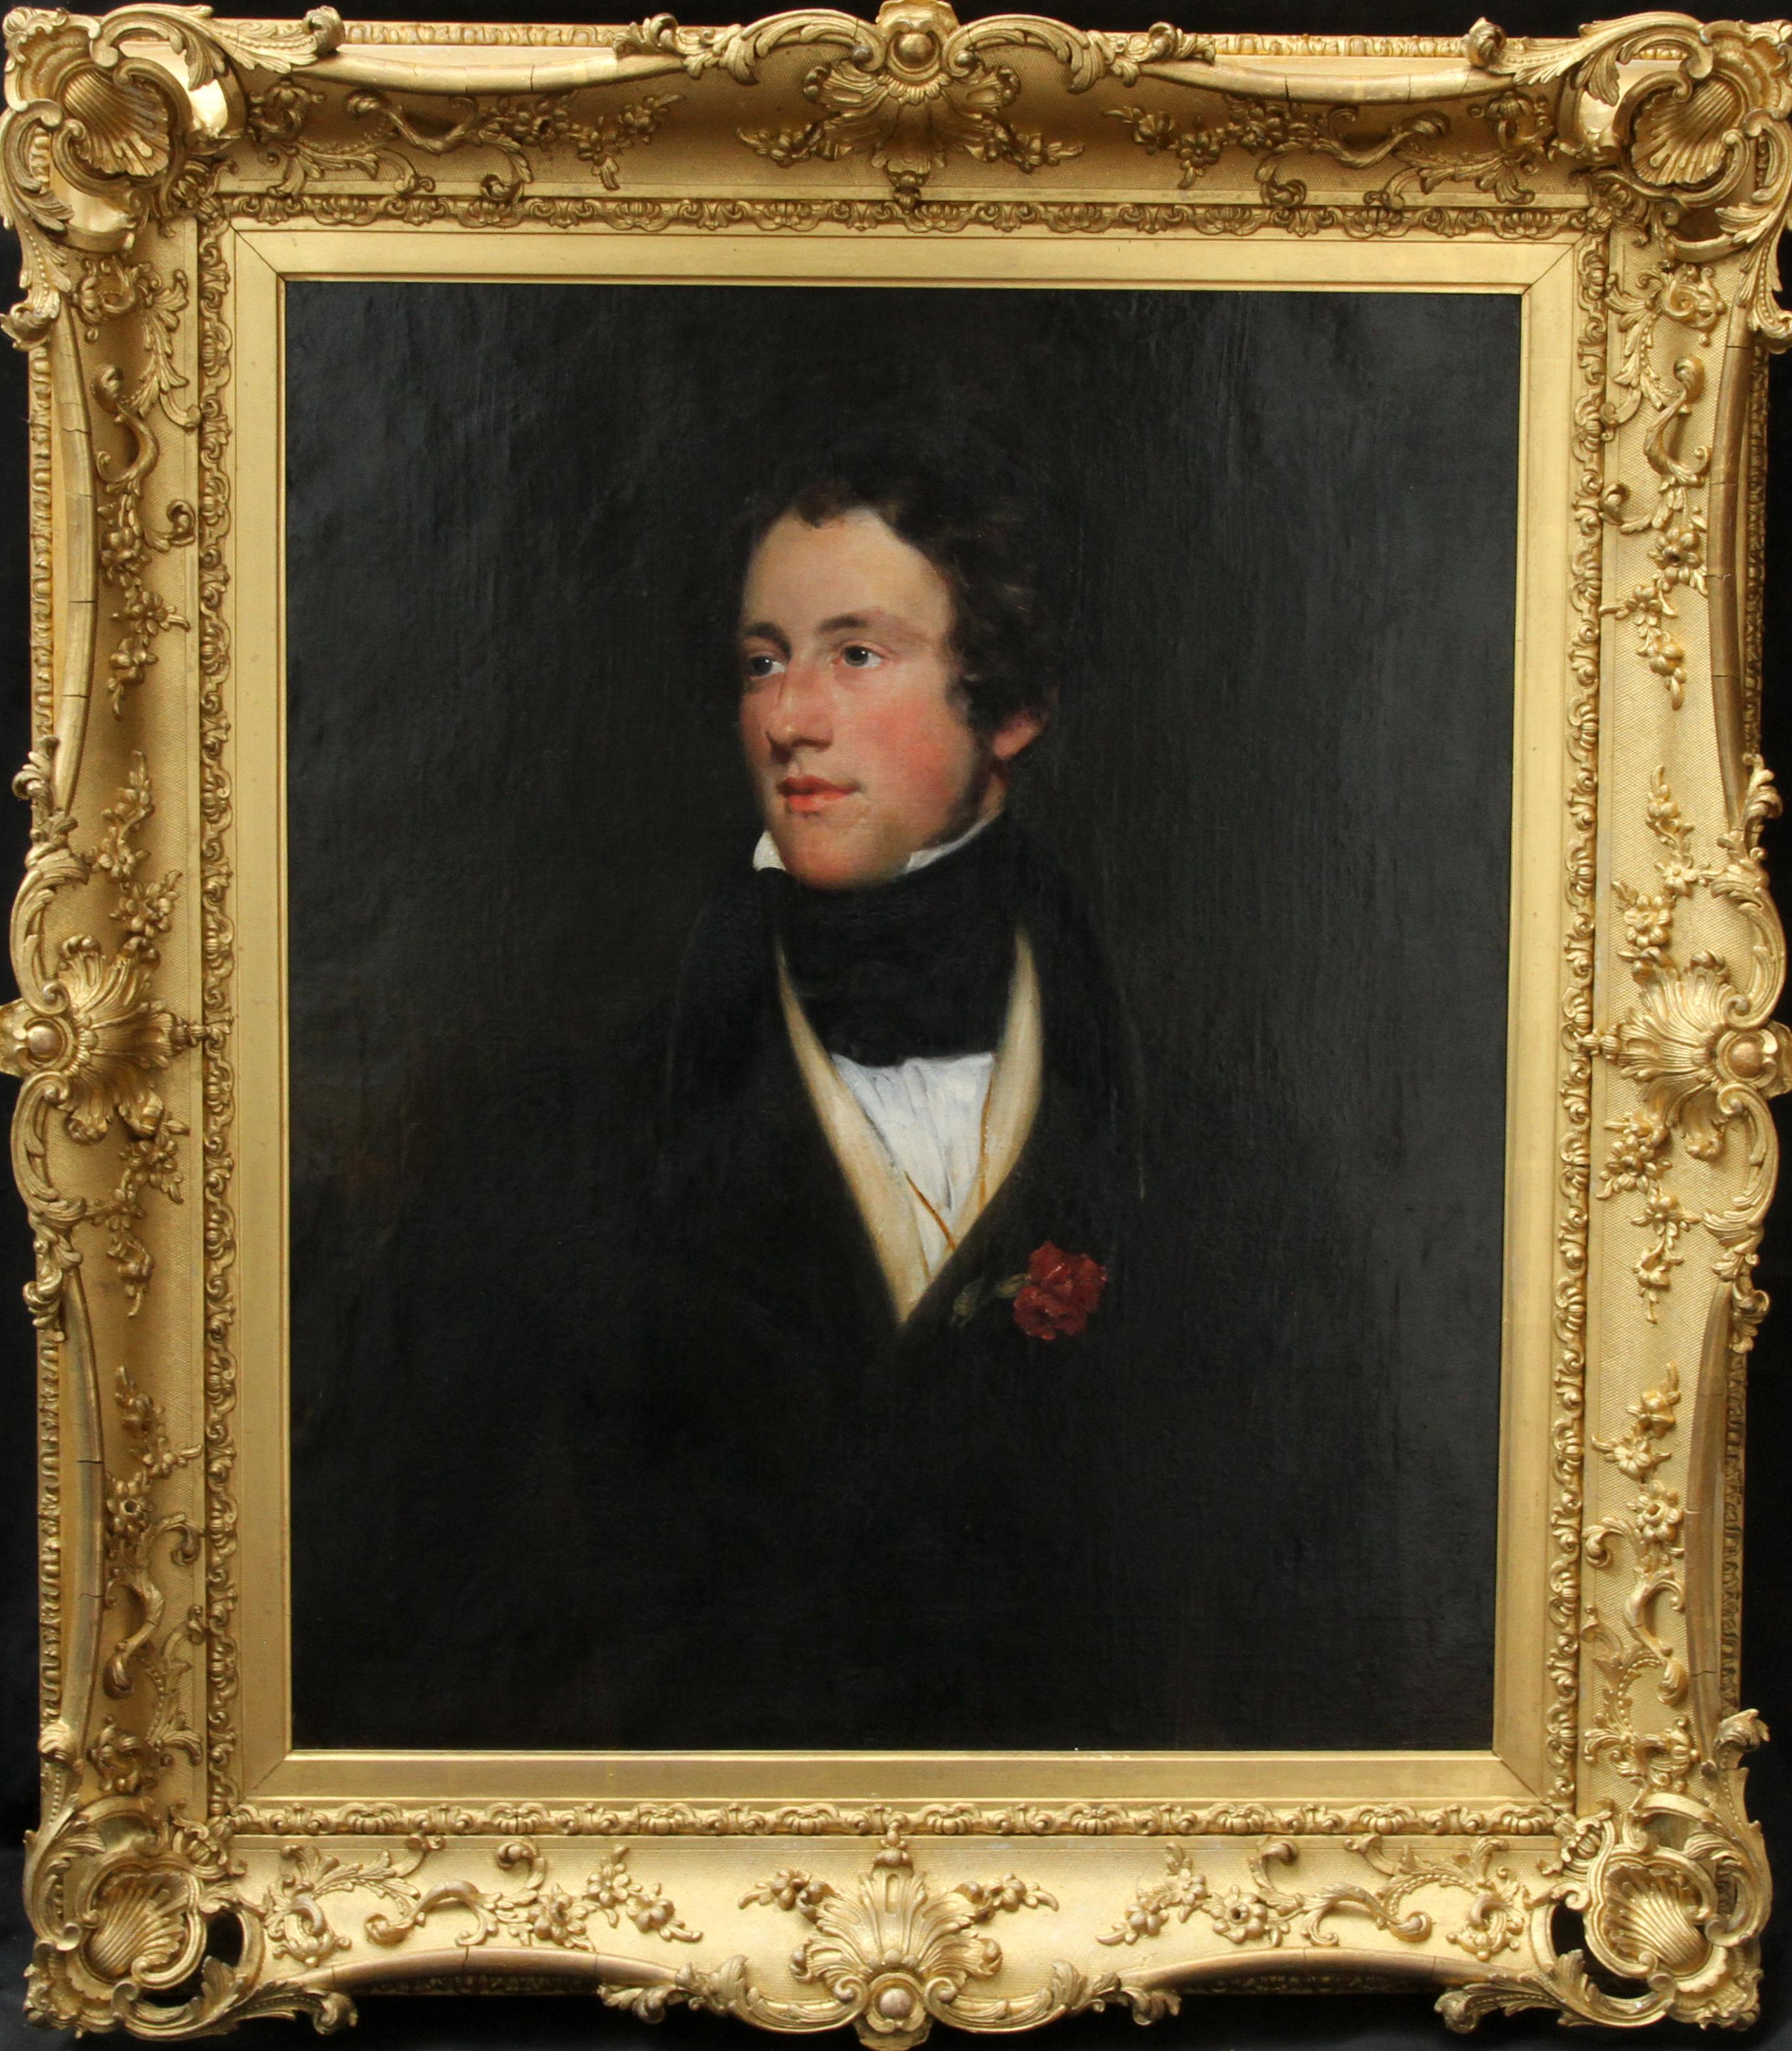 This truly stunning British School early 19th century Regency portrait oil painting is by an unknown hand. It is attibuted to the circle of Thomas Lawrence and dates to about 1820. One can tell from the exquisite artistry of the face that it has